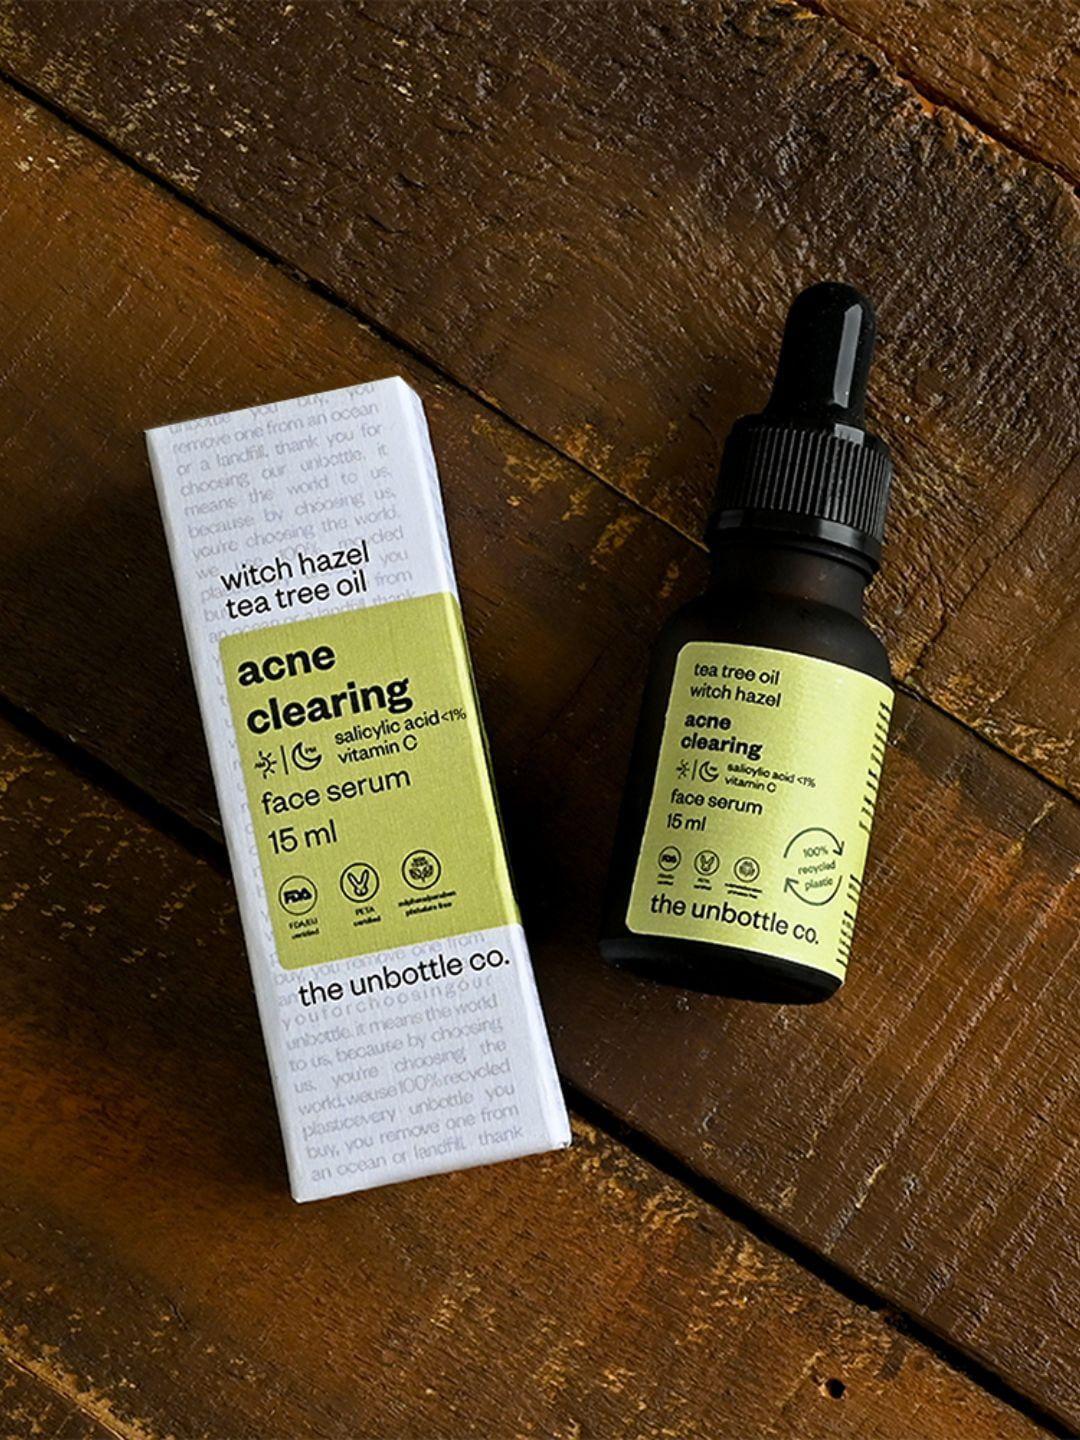 the unbottle co skintelligent acne clearing face serum 15ml